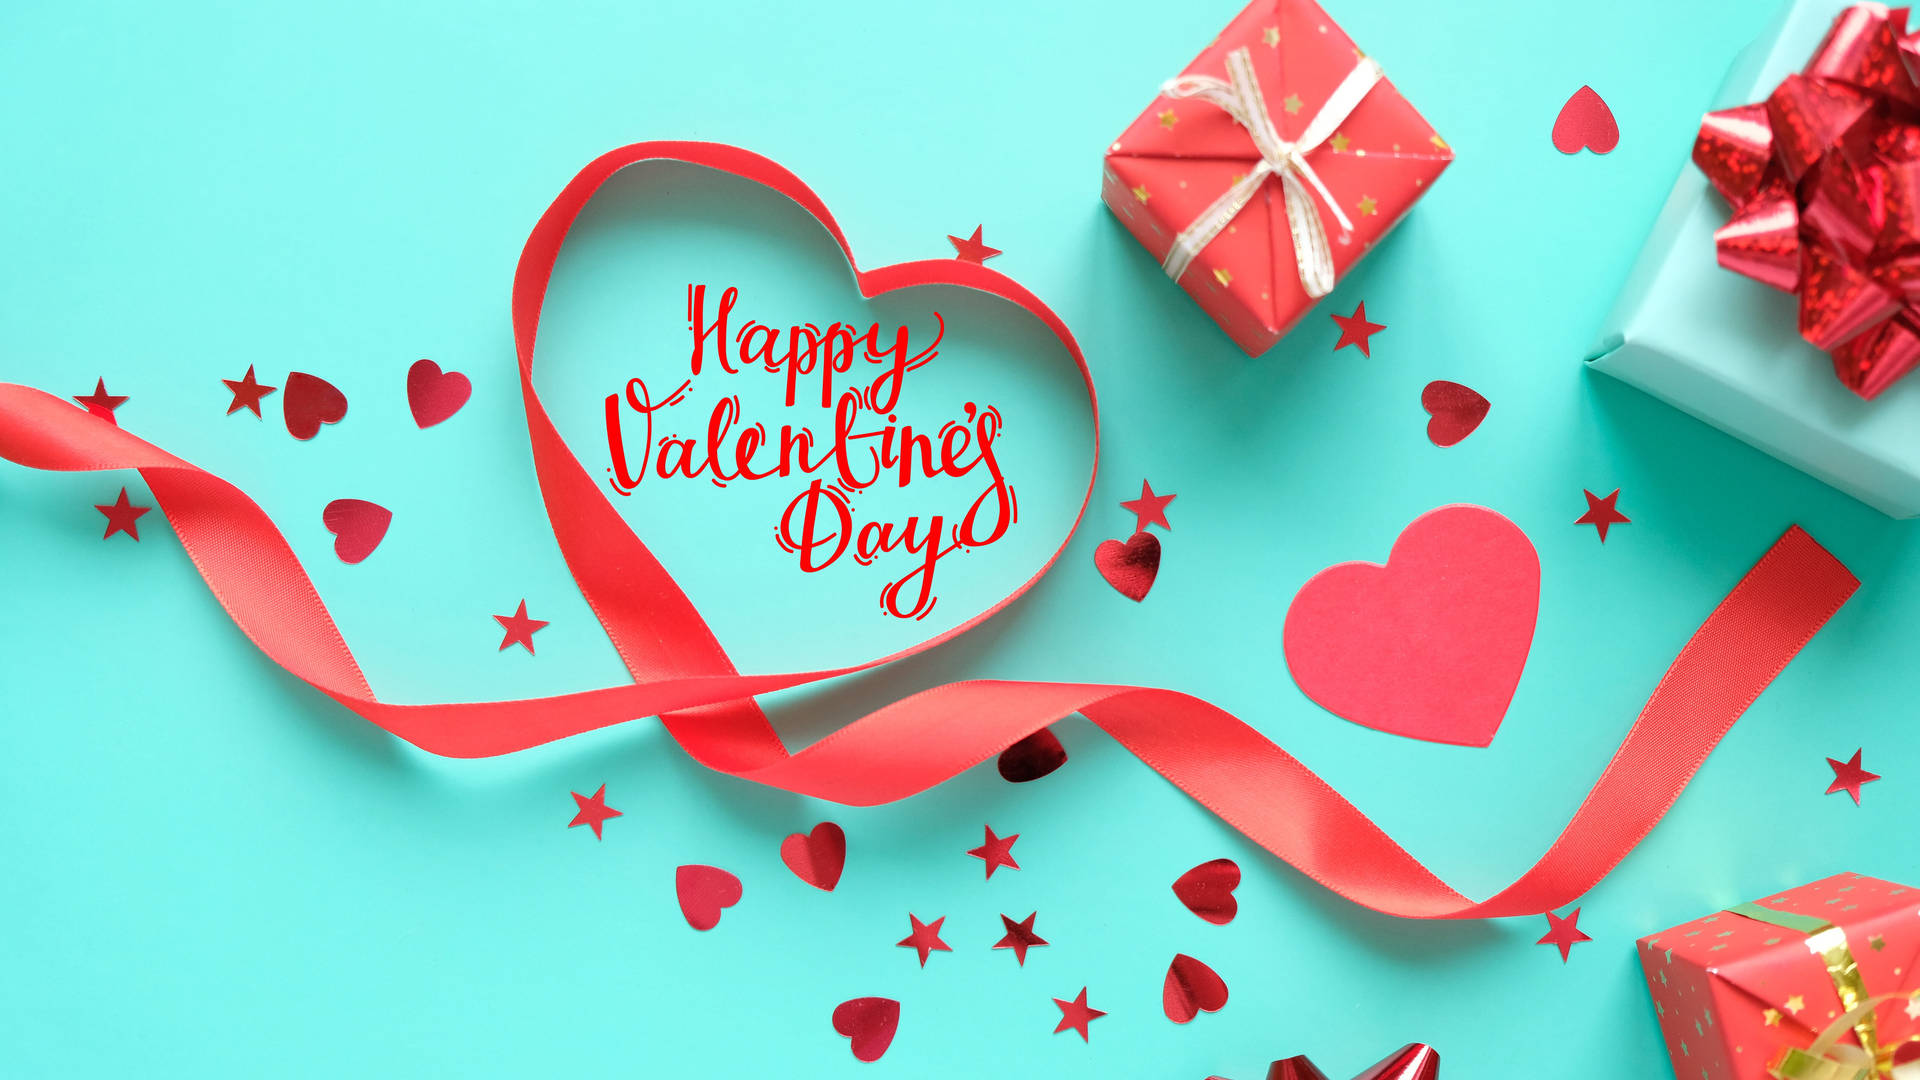 Teal Happy Valentine’s Day Wallpaper